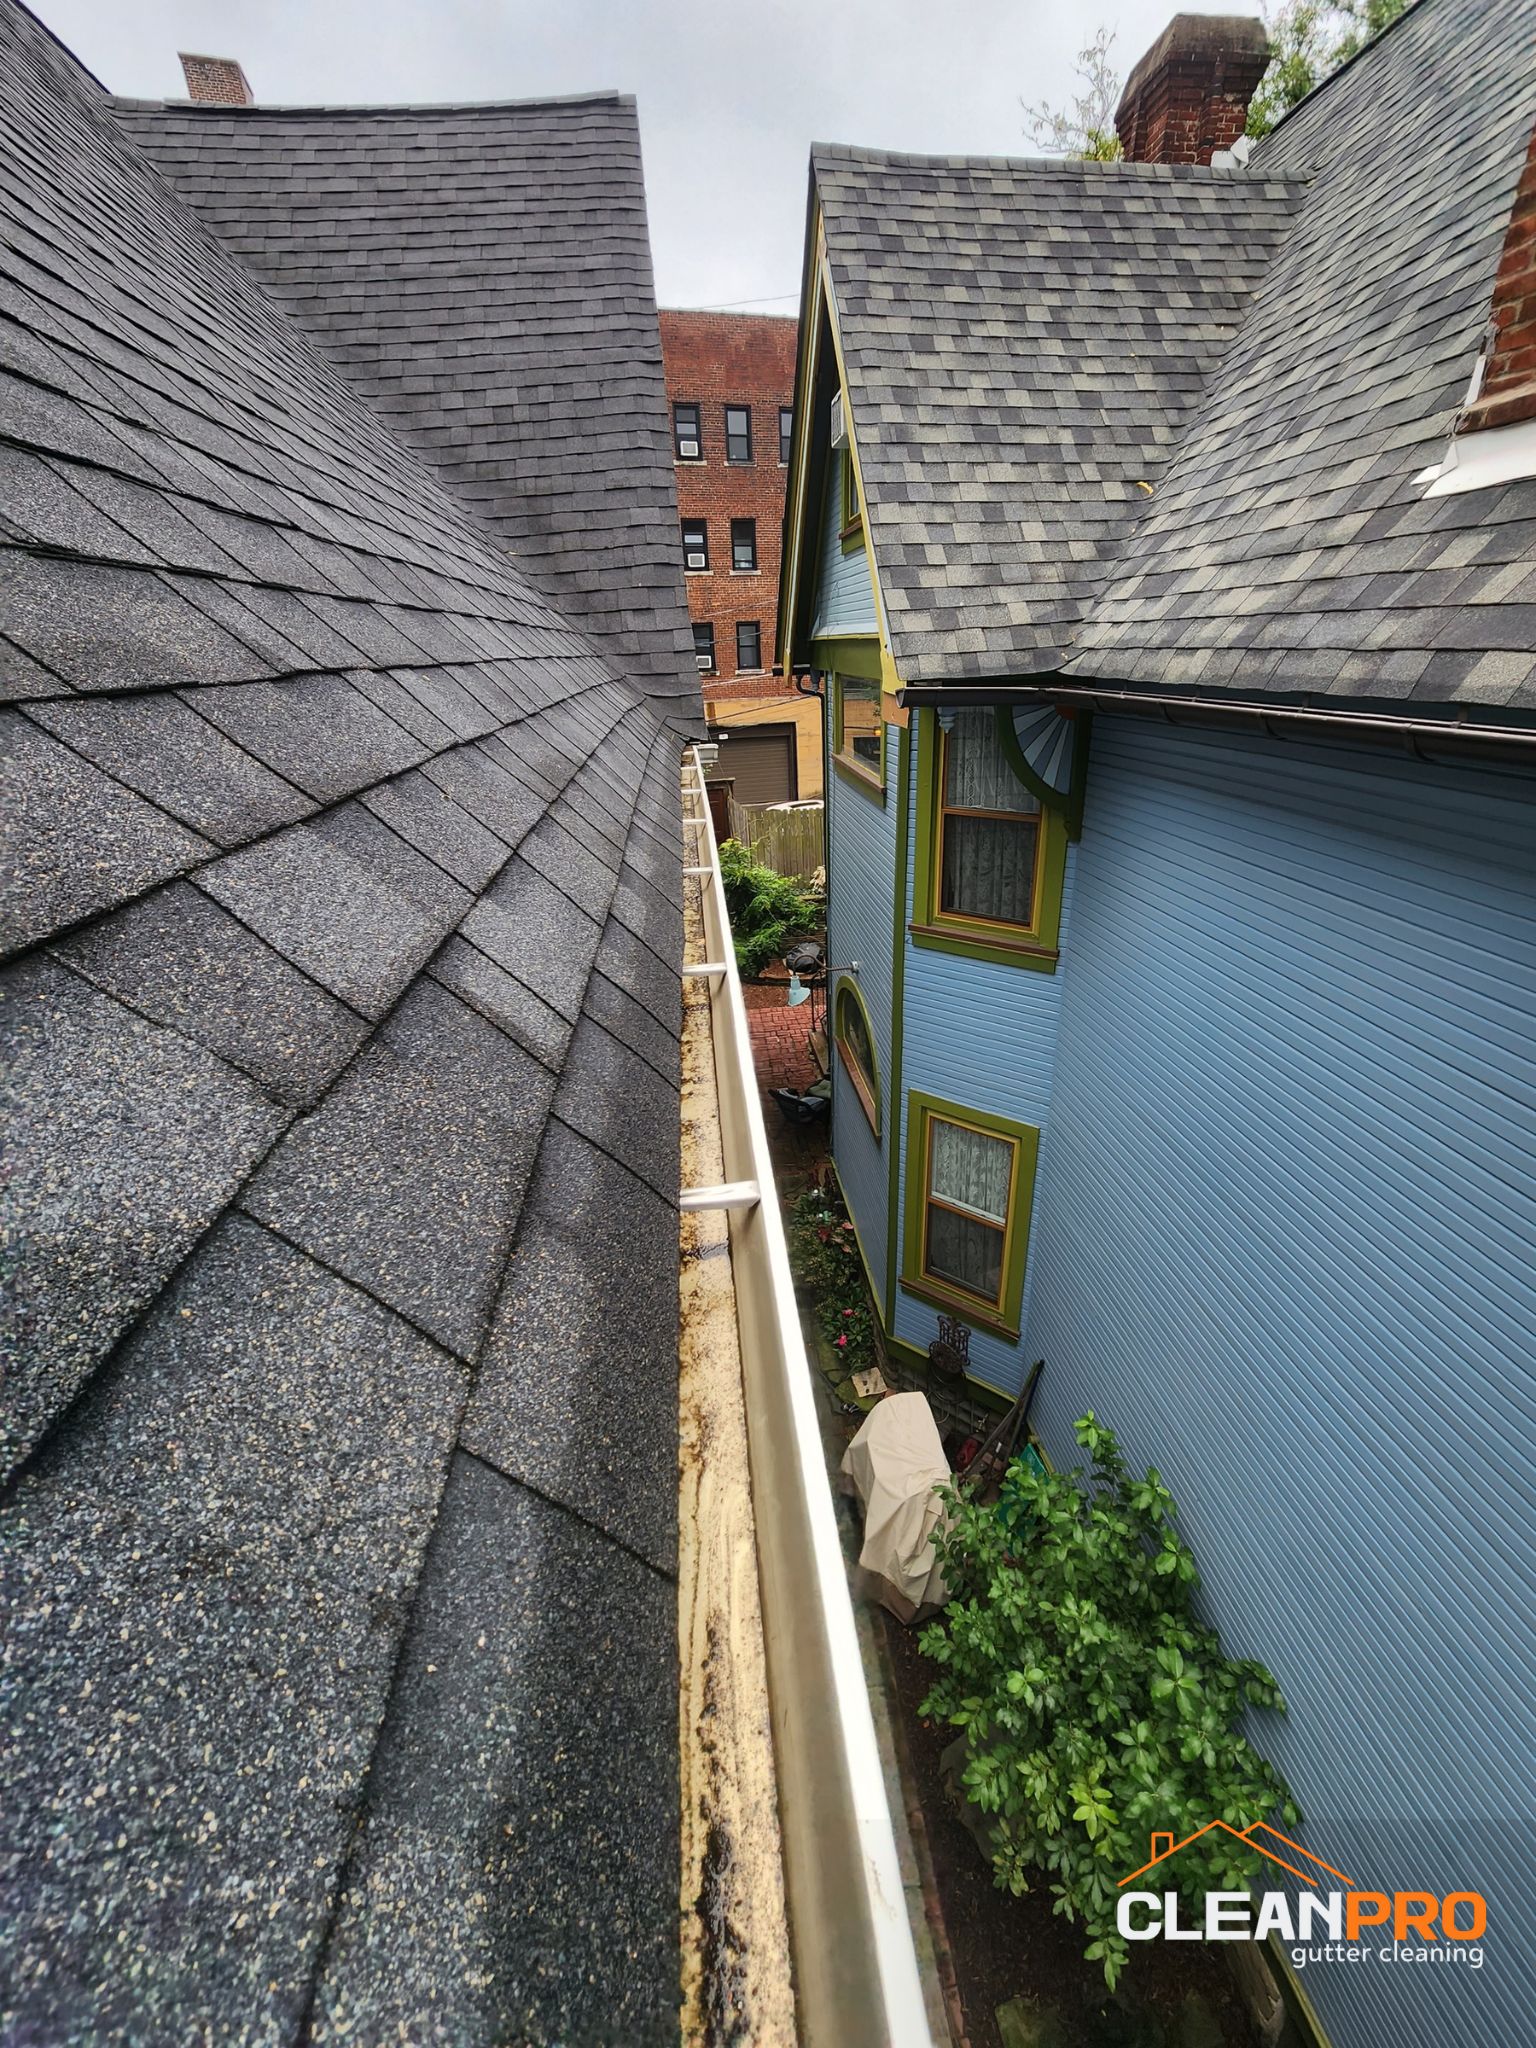 Professional Pittsburgh Gutter Cleaners